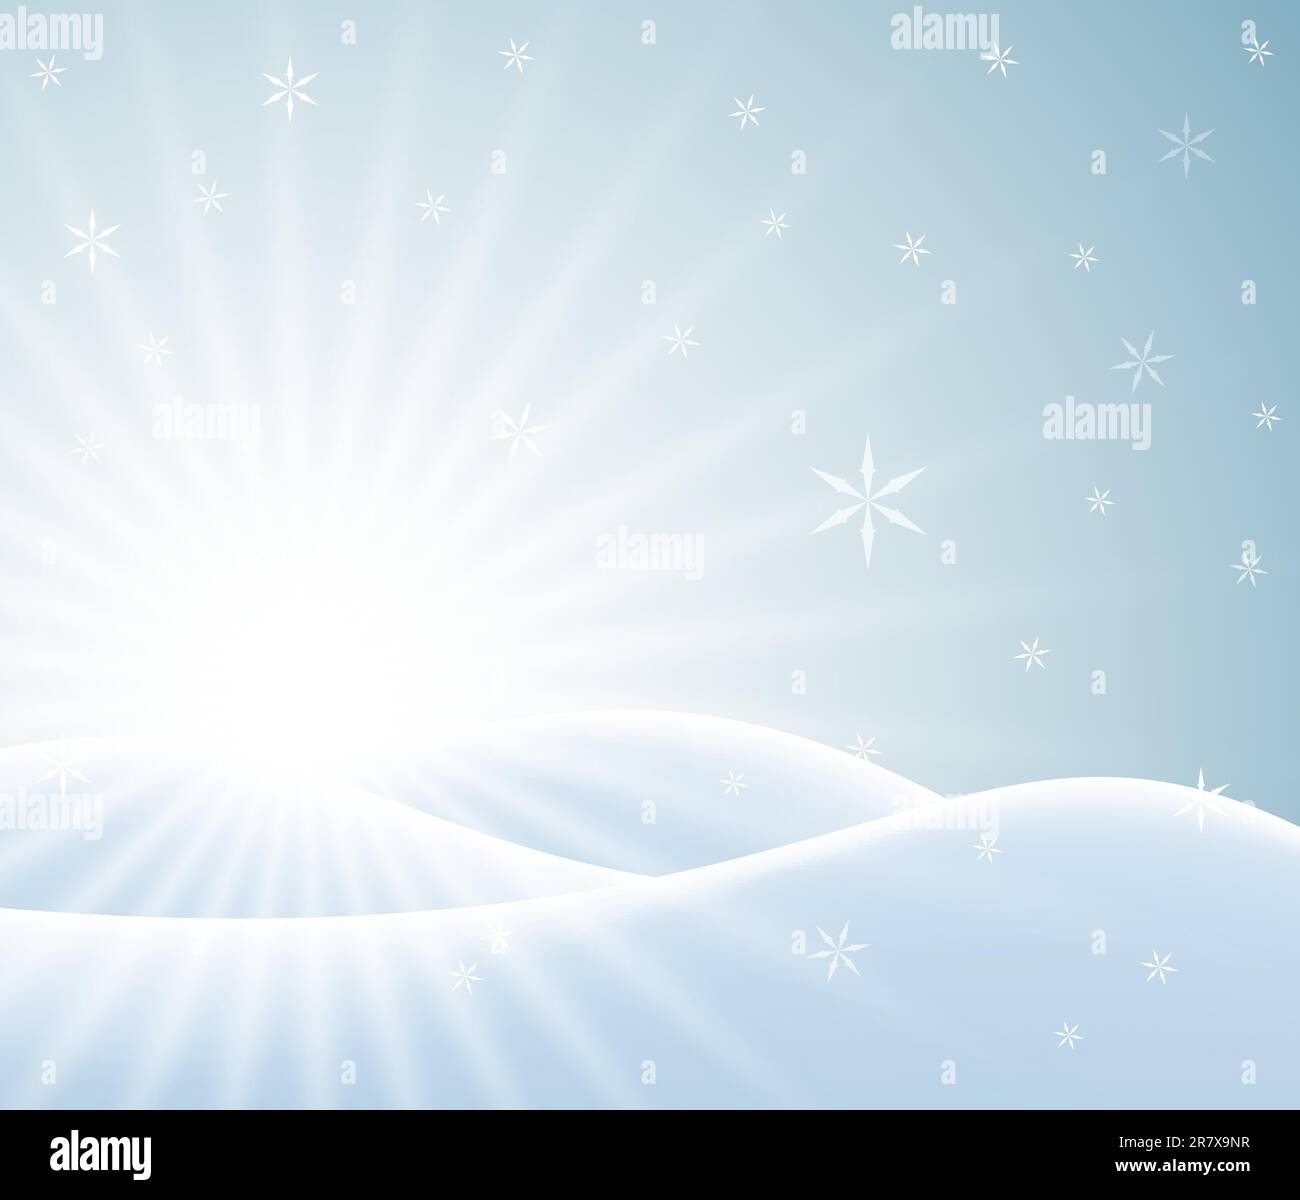 Winter card with snowy landscape and white snowflakes Stock Vector